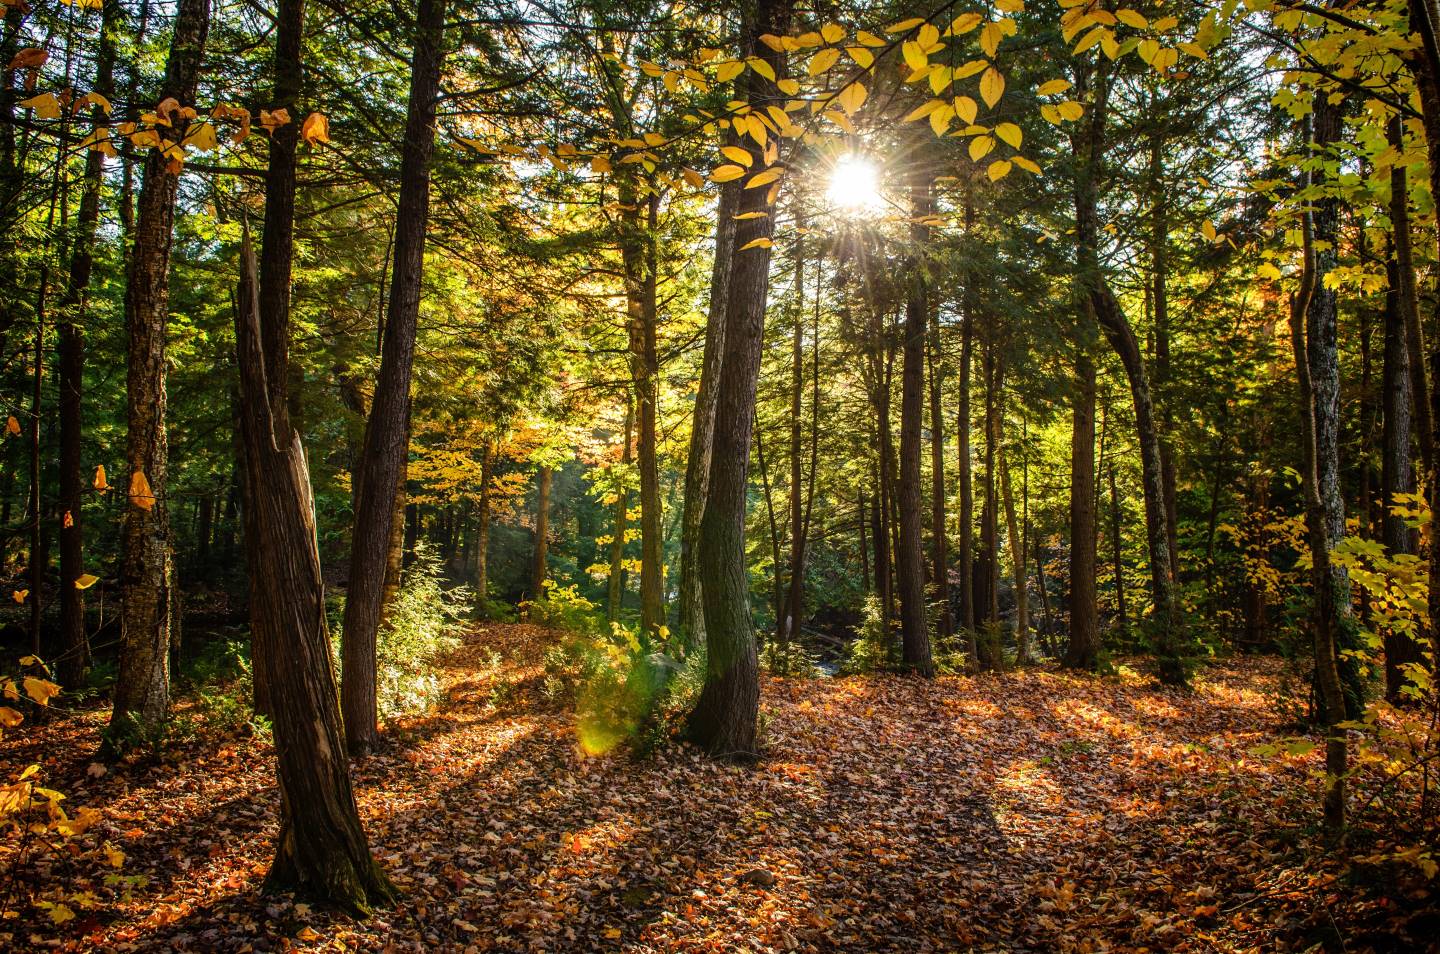 beautiful-shot-forest-with-green-trees-yellow-leaves-ground-sunny-day.jpg__PID:1813038d-12cf-44d6-9e6b-eda3983f61fb